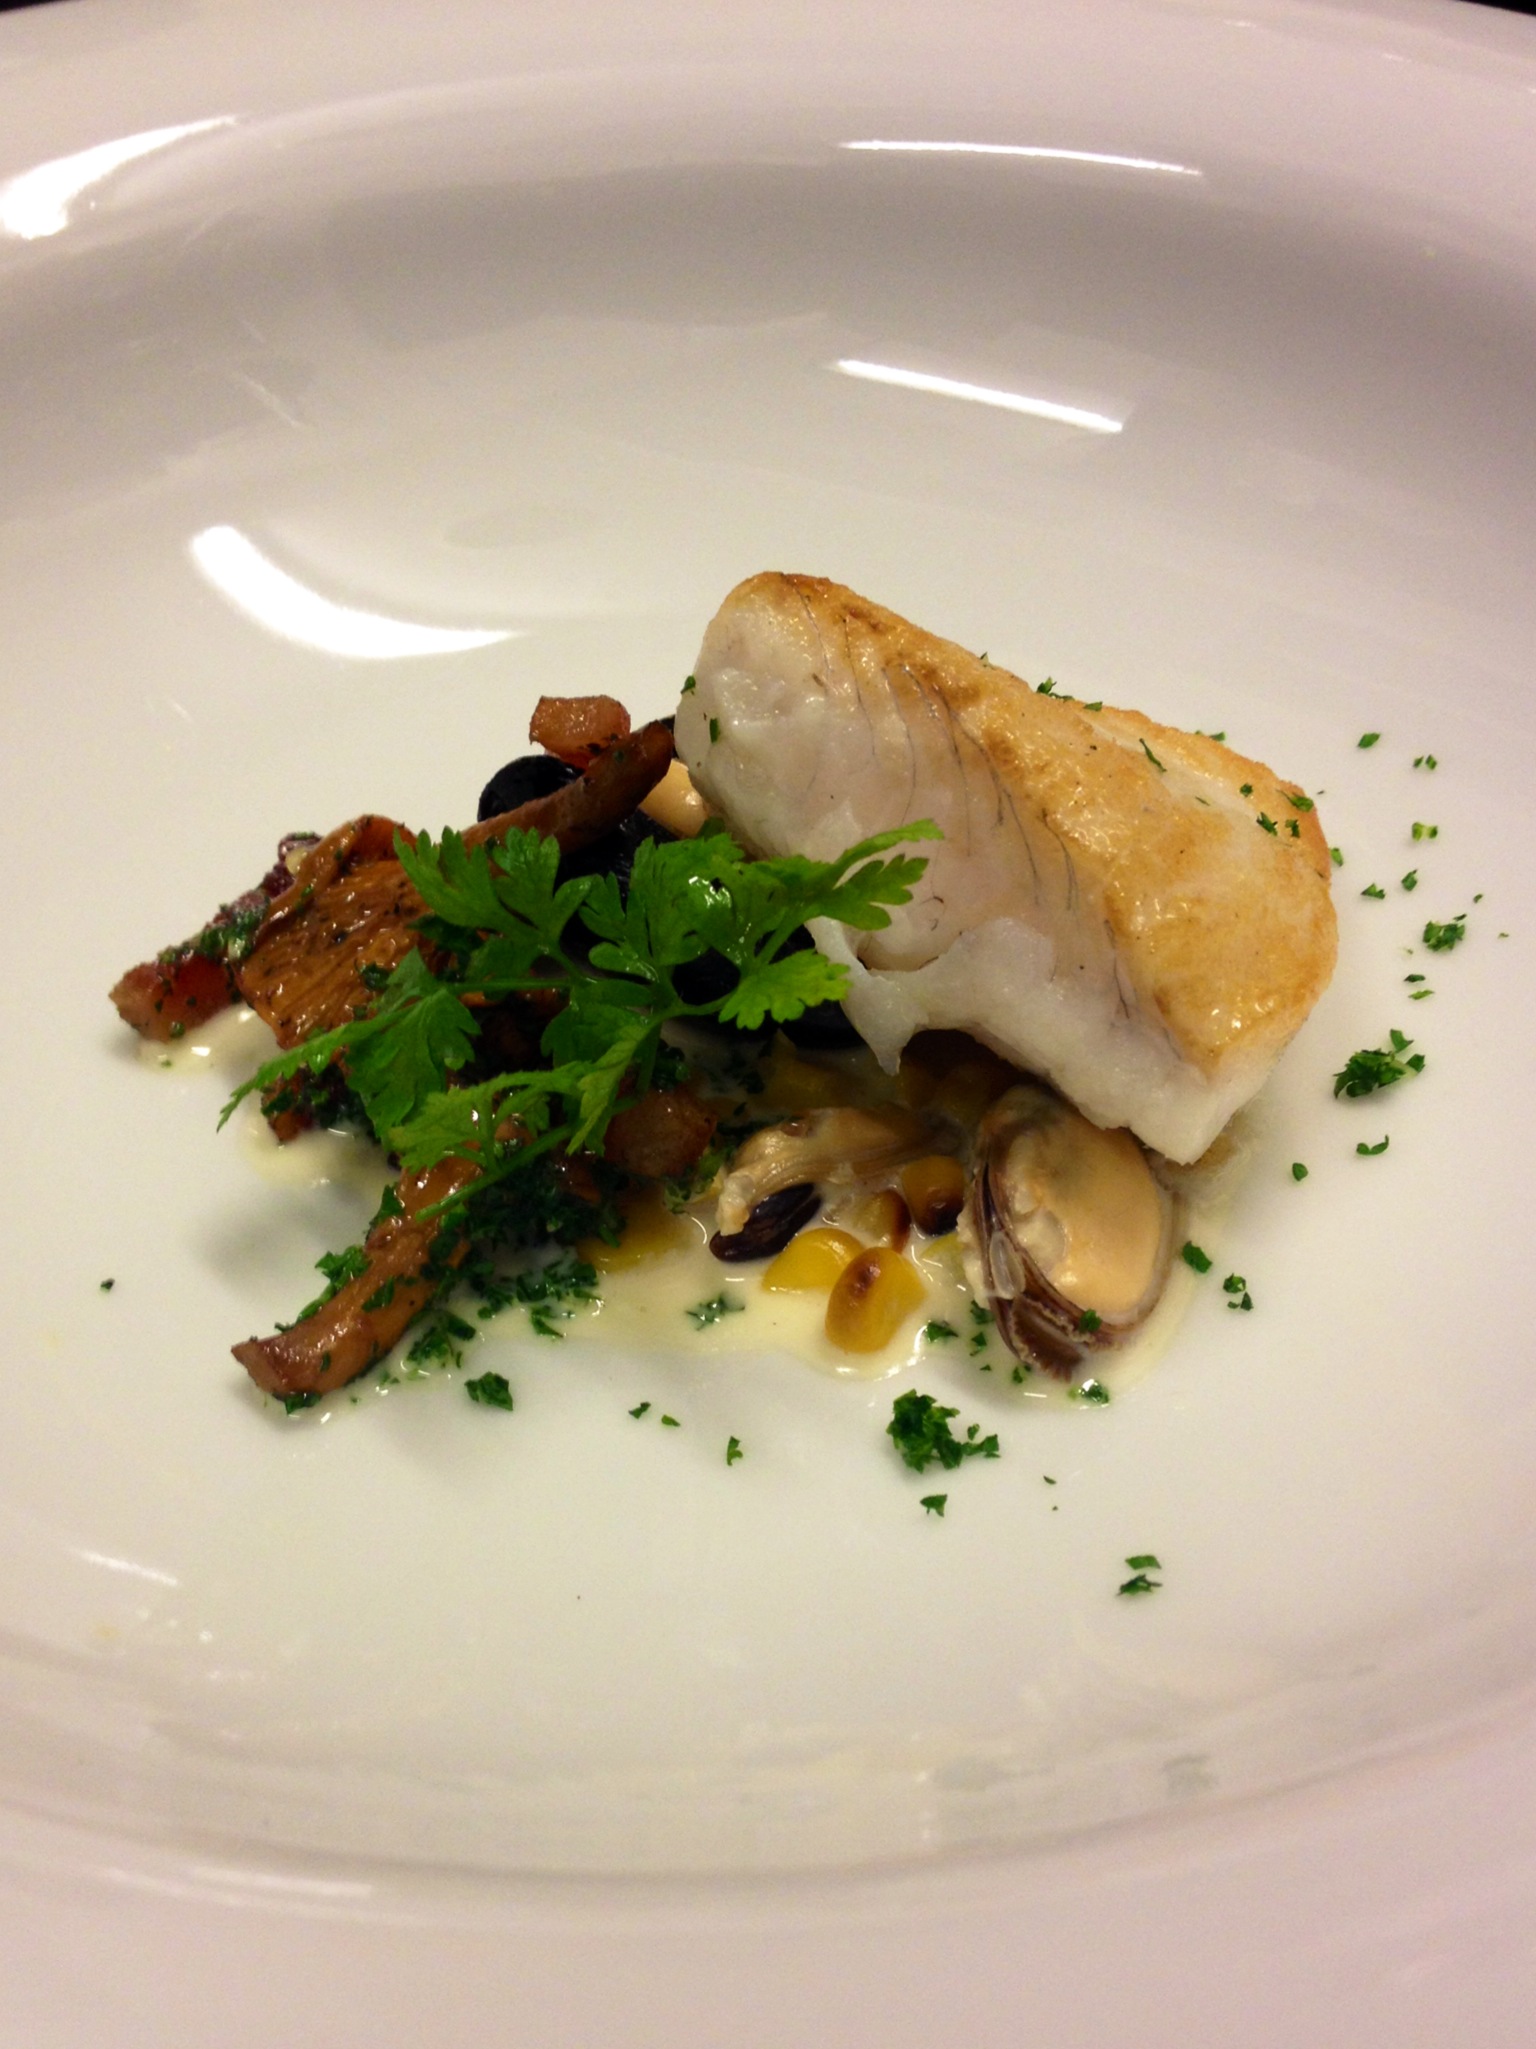 Pan-fried-brill-with-girolles-bacon-and-mussells.jpg